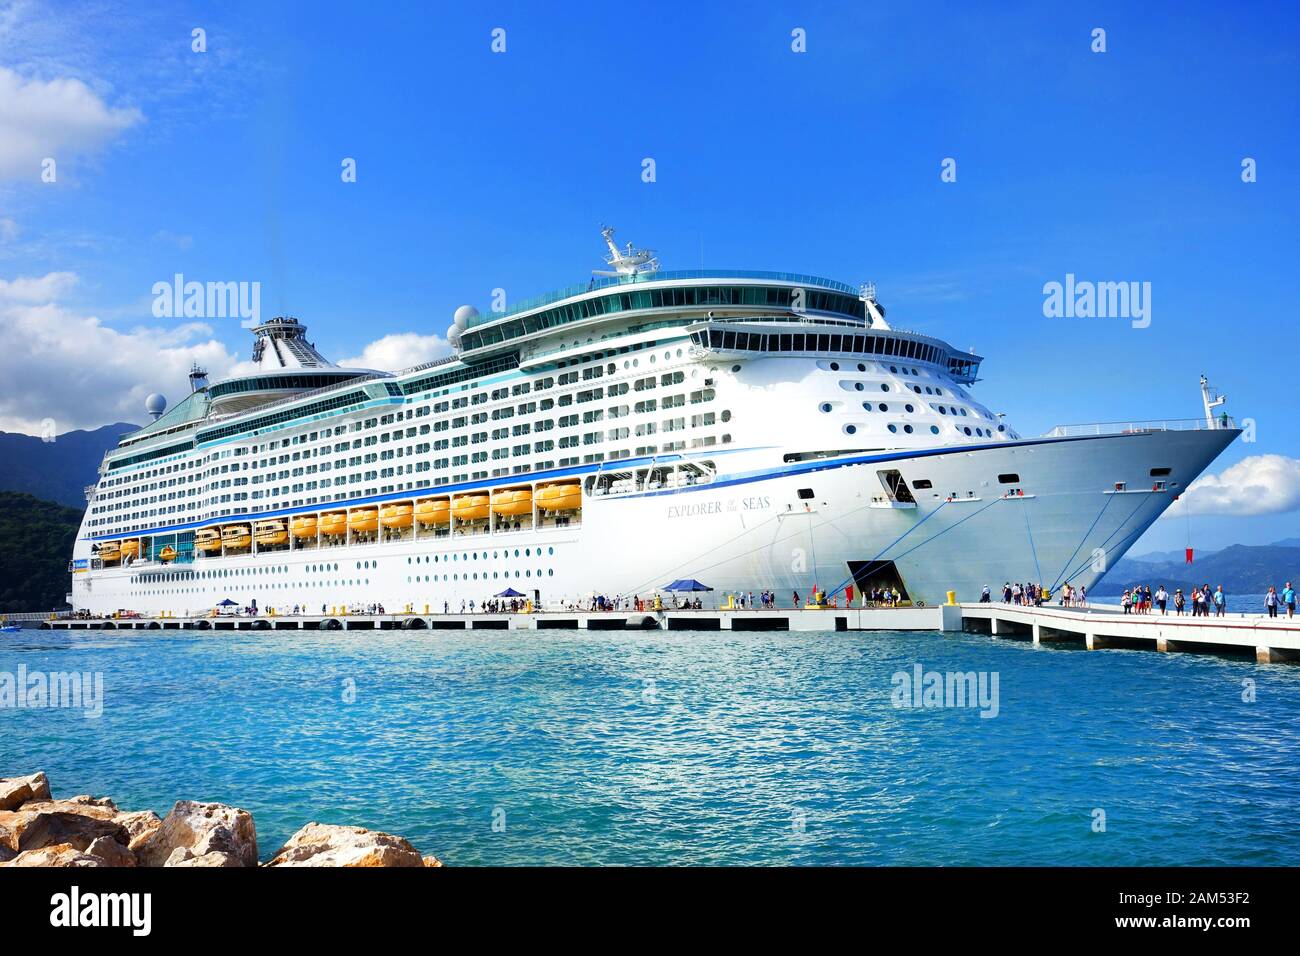 The Royal Caribbean Cruise liner, Explorer of the Seas, moored at at port in Labadee, Haiti. Passengers are disembarking and heading along the jetty Stock Photo